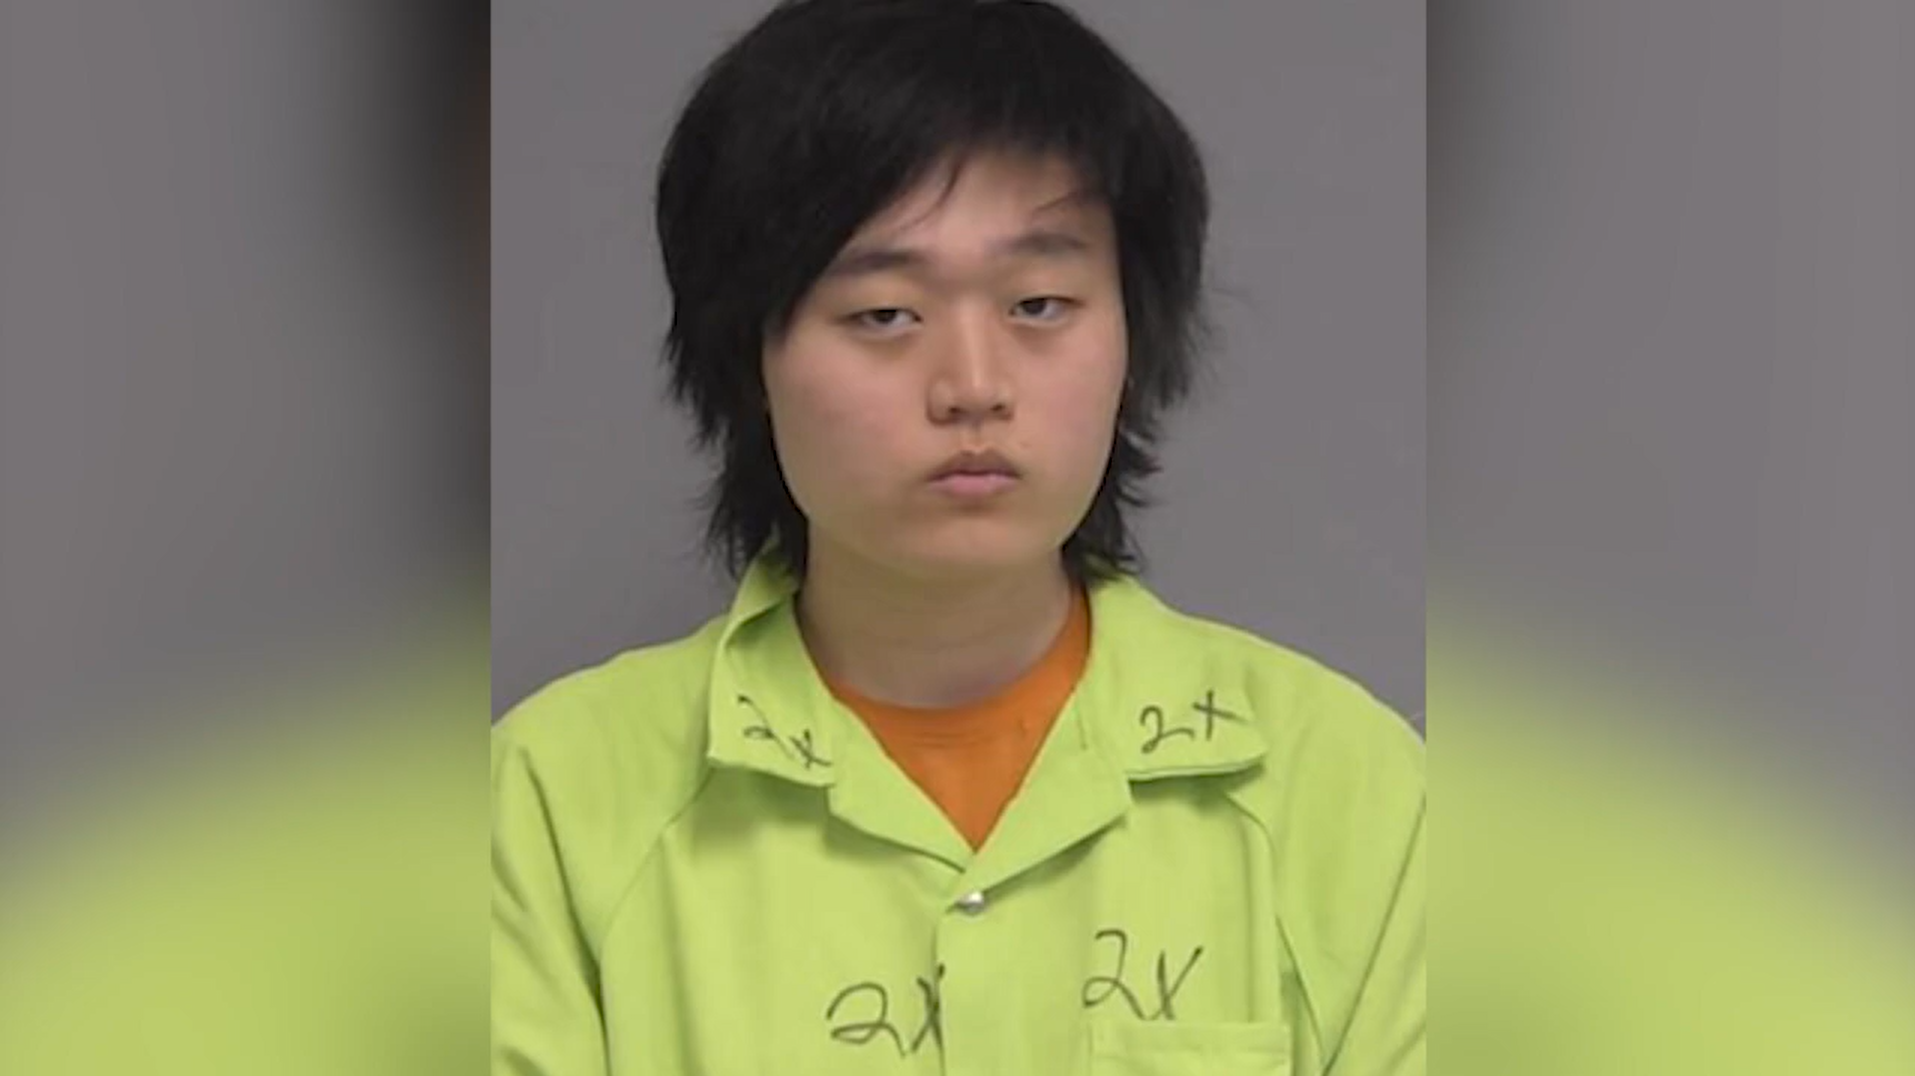 Edward Kang, 20, from New Jersey, was taken to a jail in Florida on a charge of second-degree attempted murder. He is accused of attacking a fellow gamer after an online spat